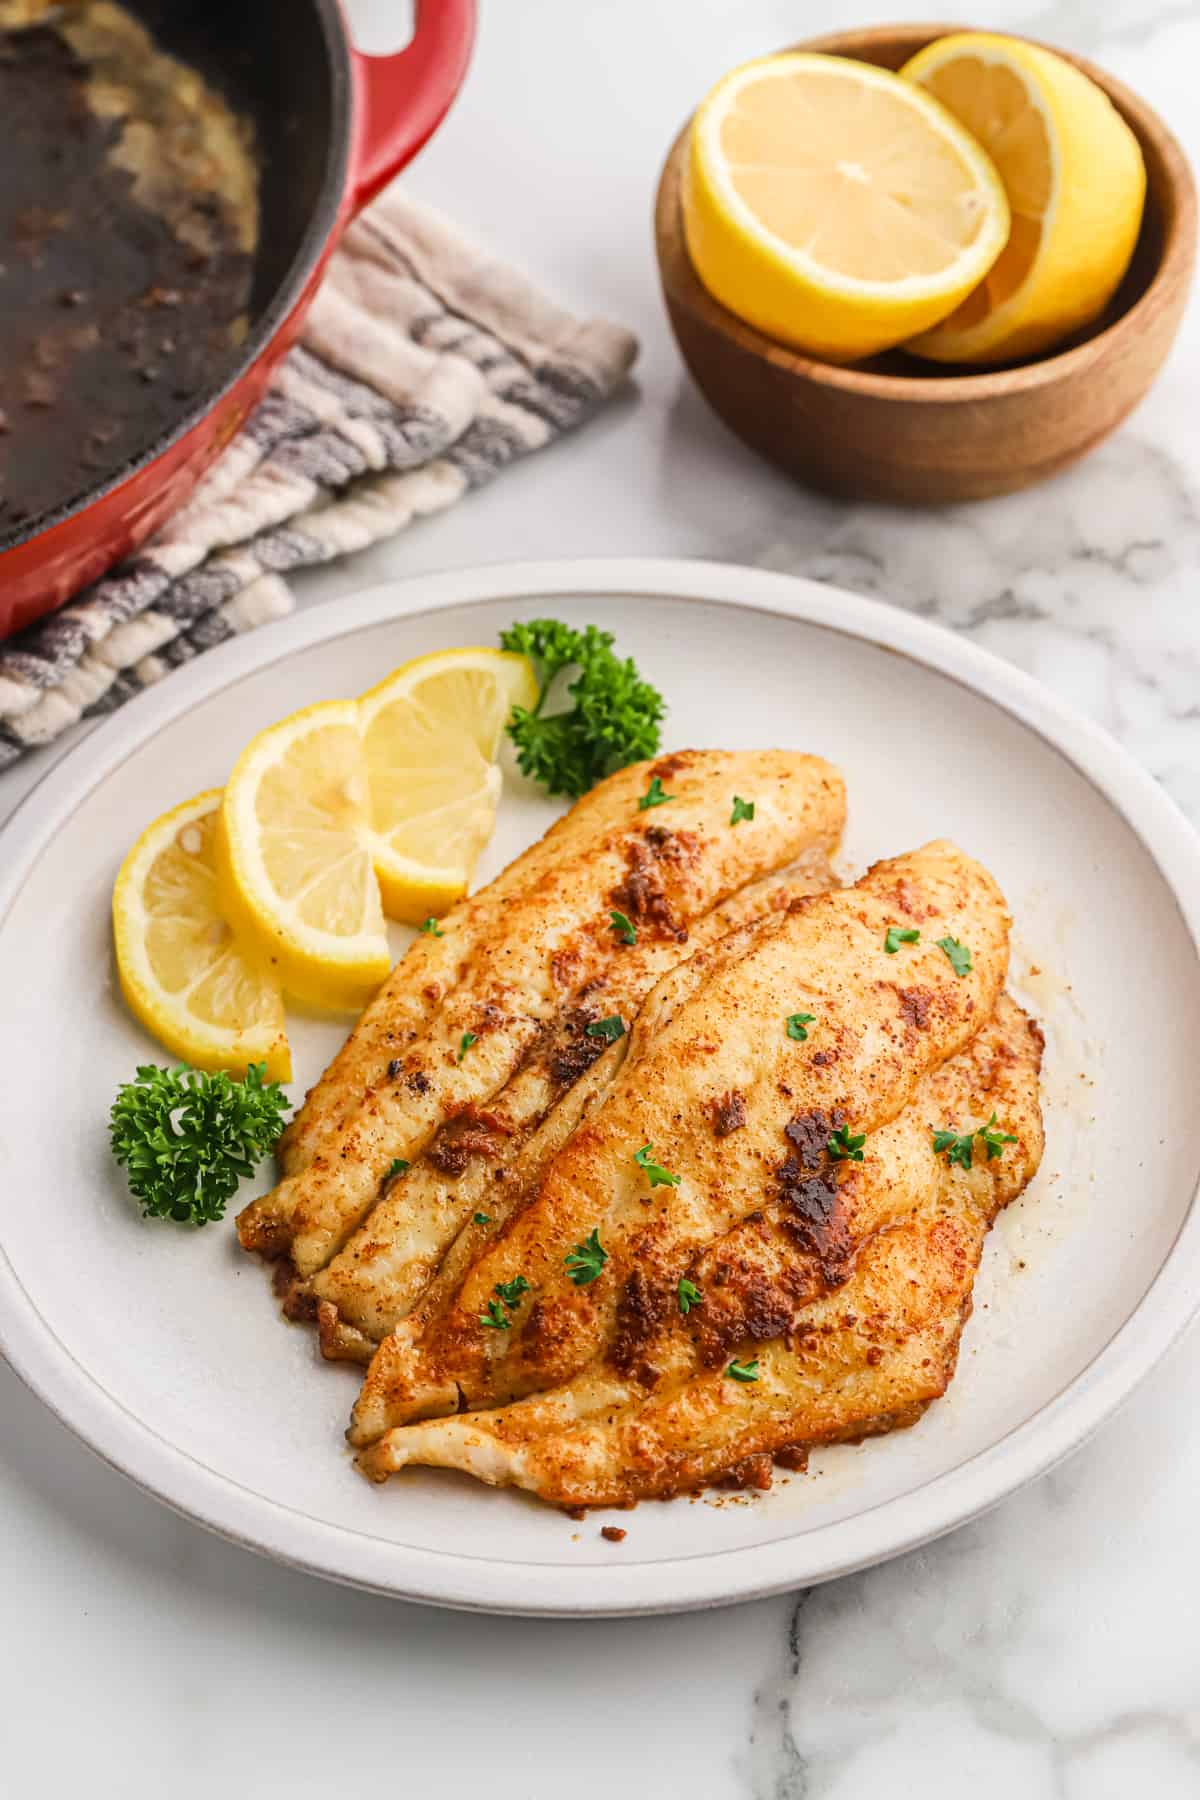 Blackened catfish fillets on a plate with lemon slices.